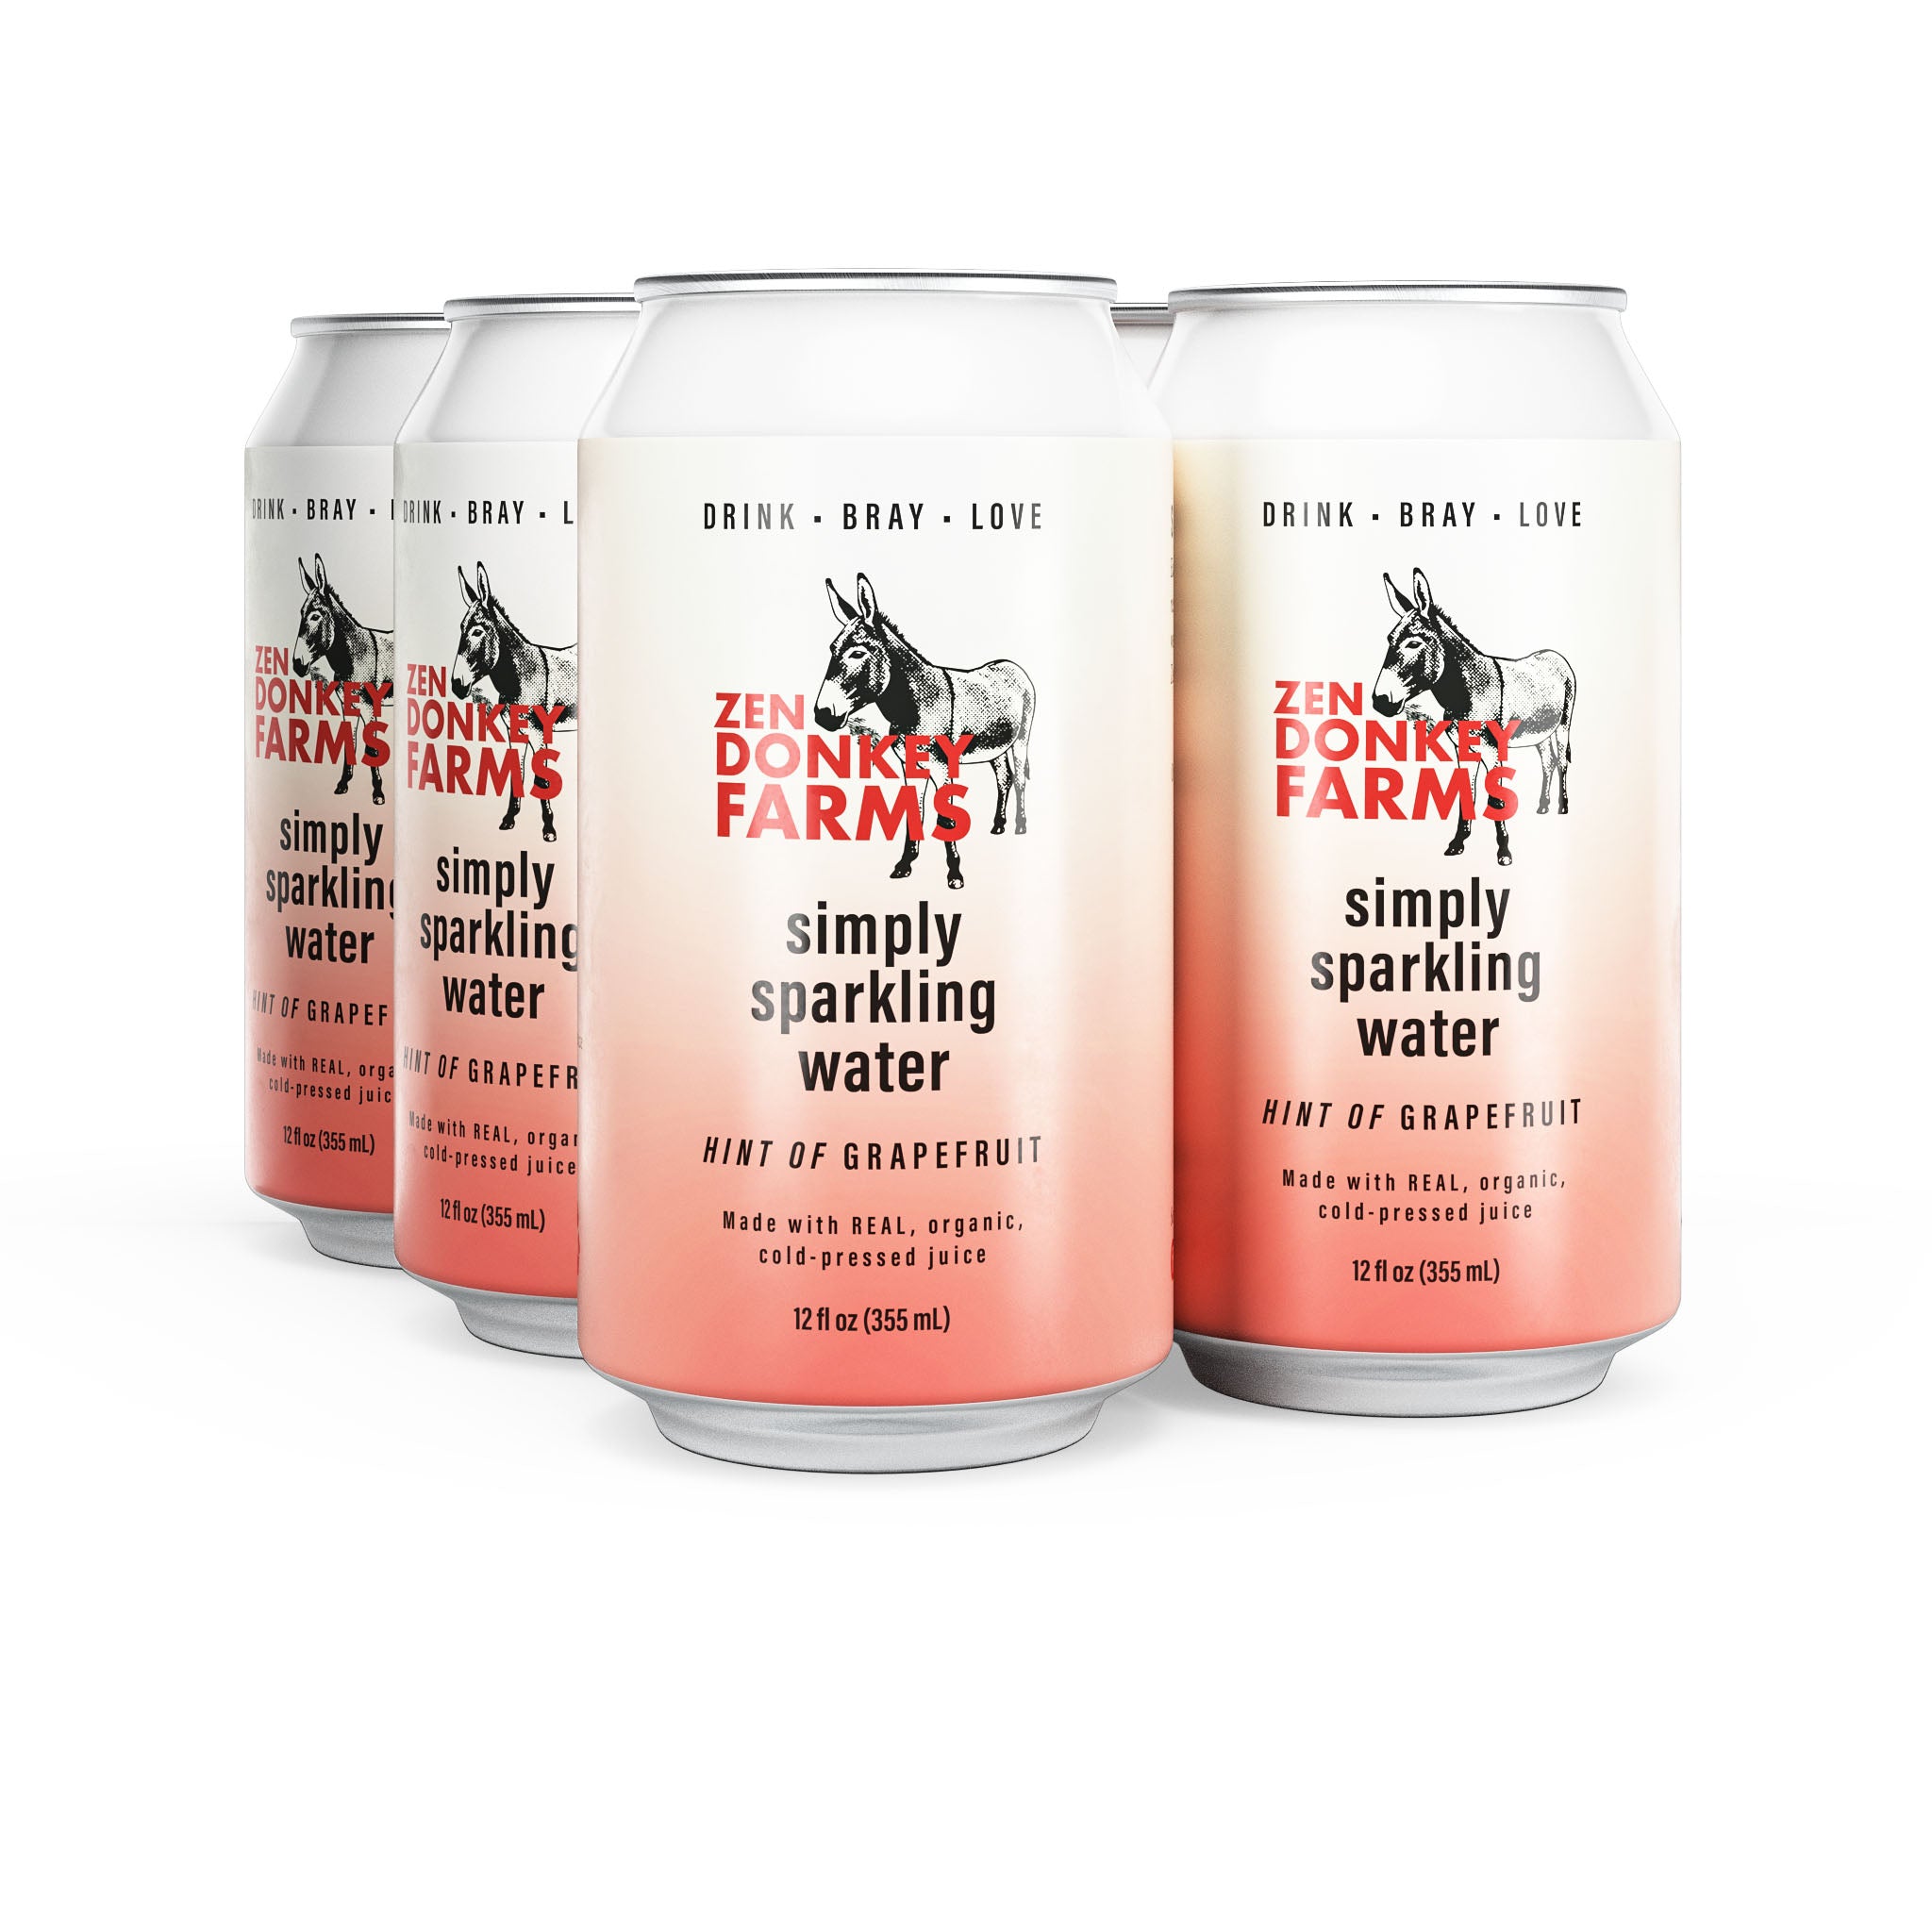 Simply Sparkling Water - Hint of Grapefruit (6-pack) - Zen Donkey